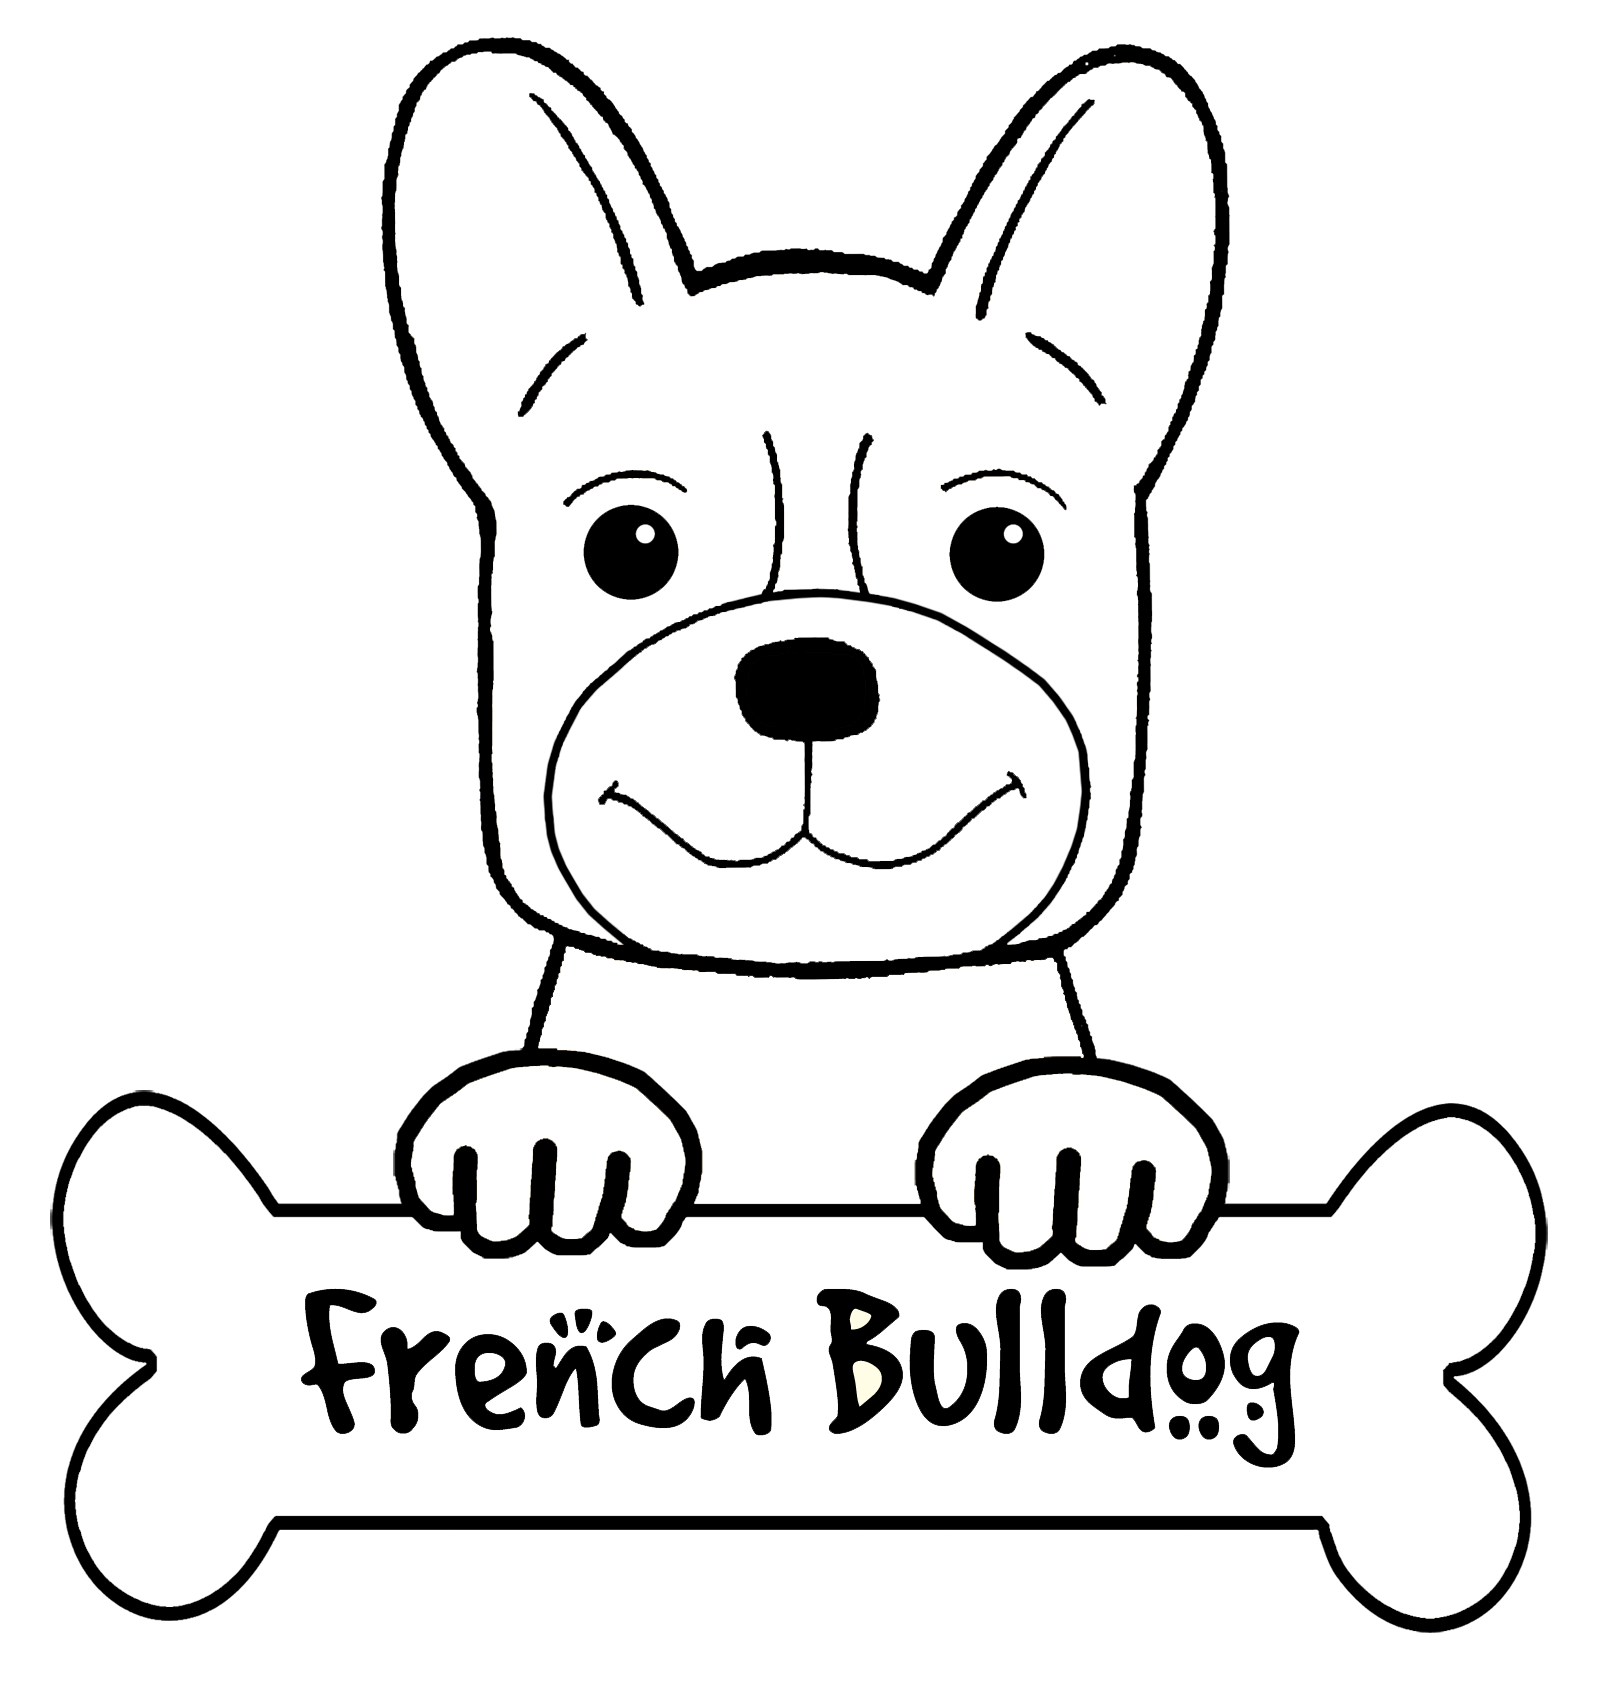 Great French Bulldog Coloring Pages of all time The ultimate guide 